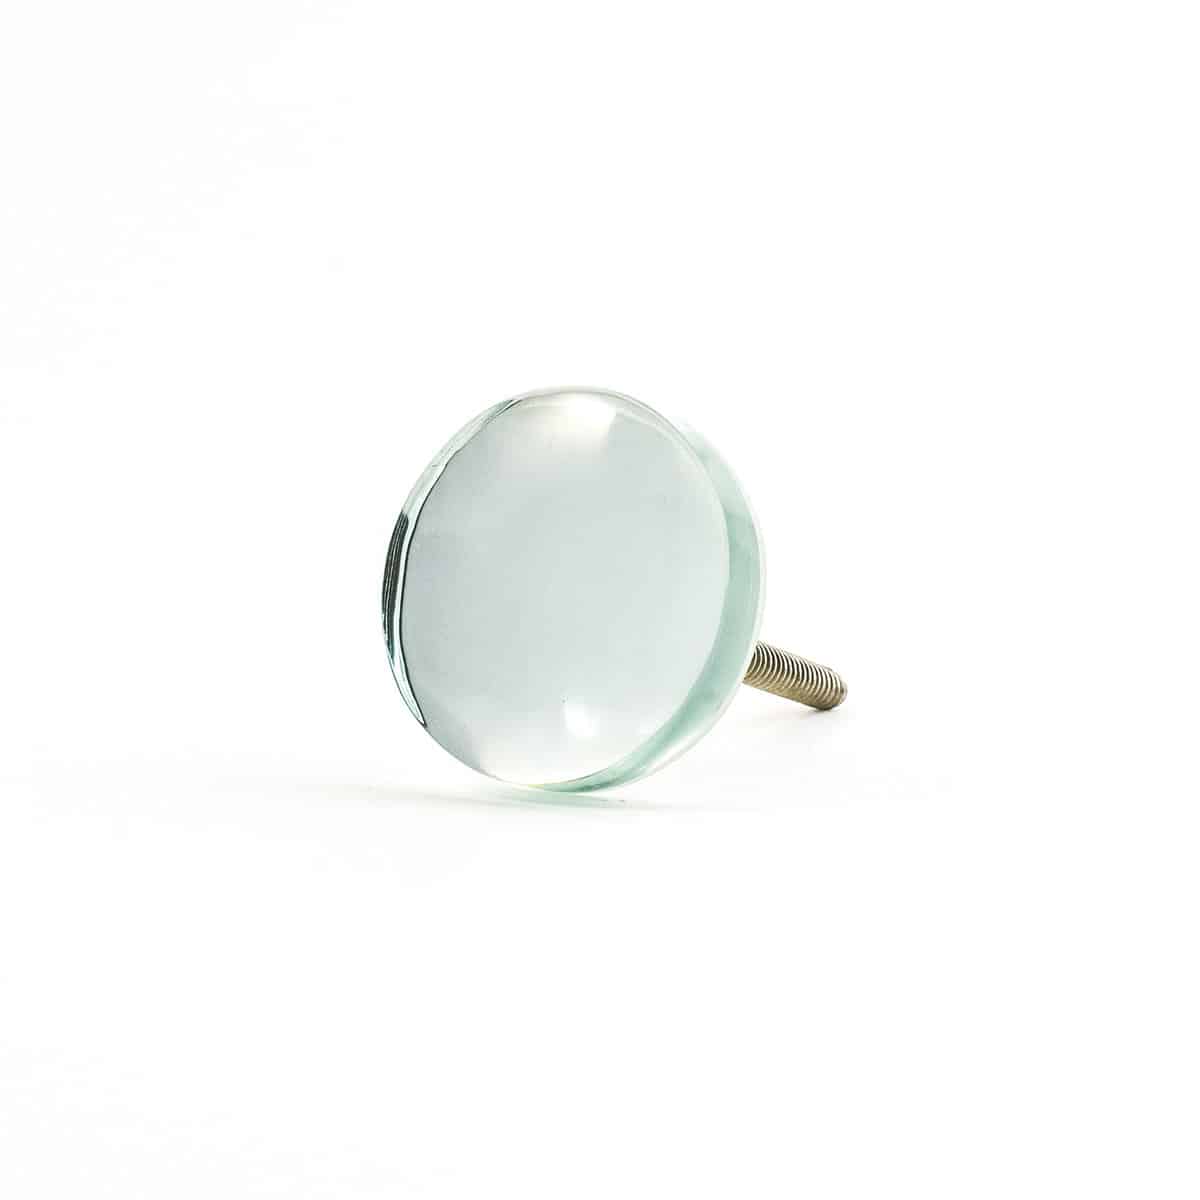 Mirrored Circle Glass Knob For, Mirrored Cabinet Knobs